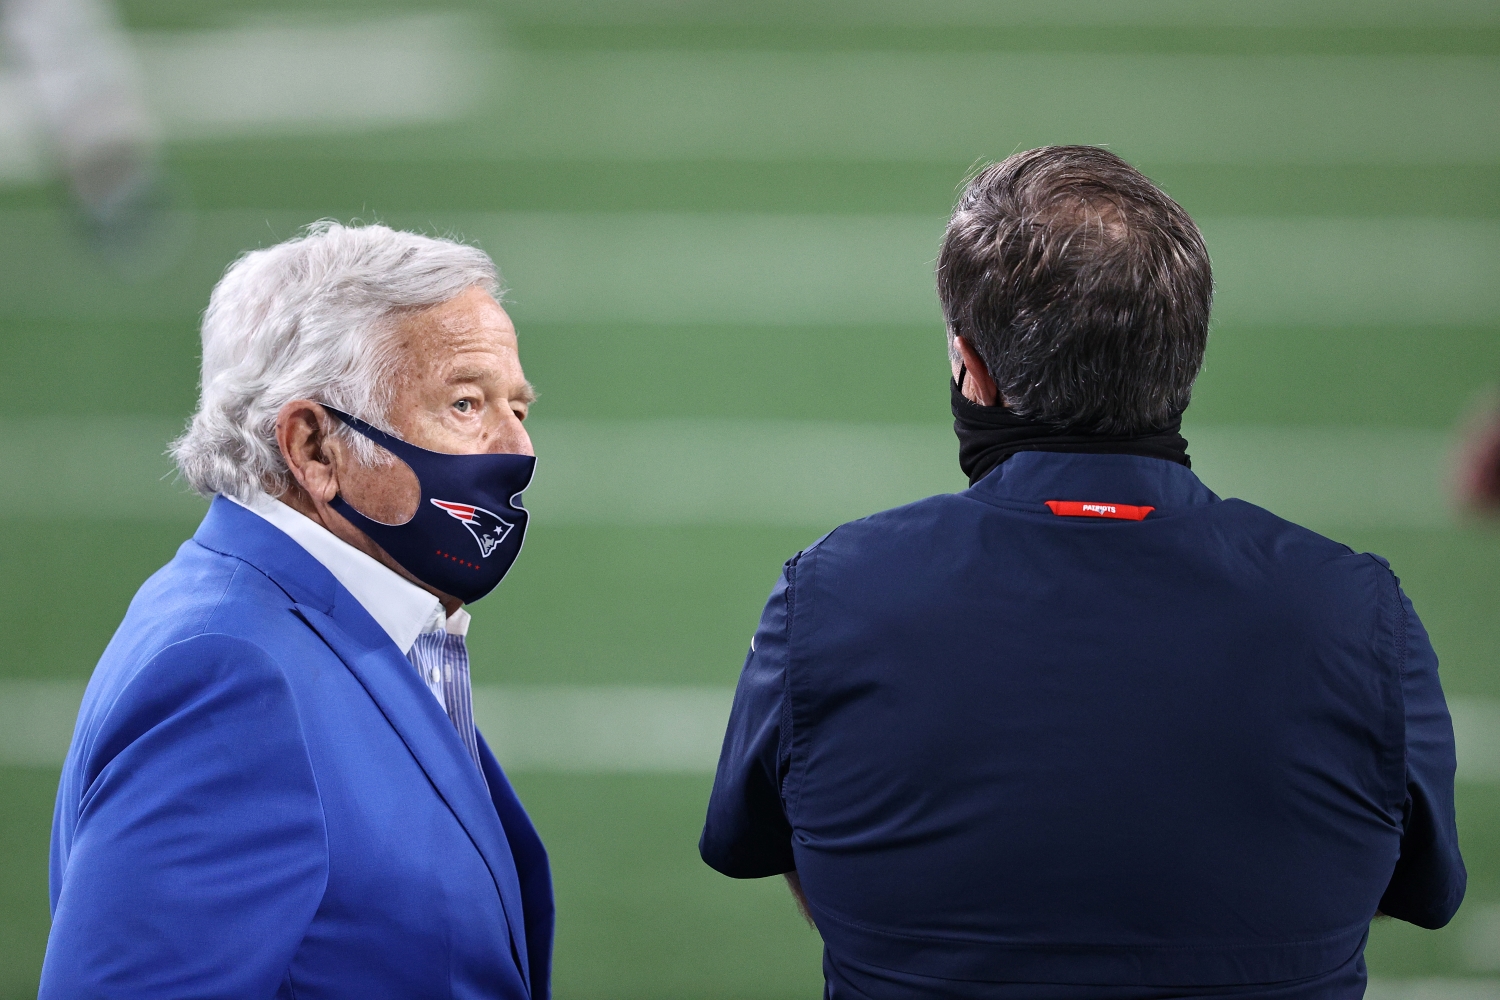 Patriots owner Robert Kraft stands next to head coach Bill Belichick during warmups before a game against the New York Jets from the 2020 NFL season.